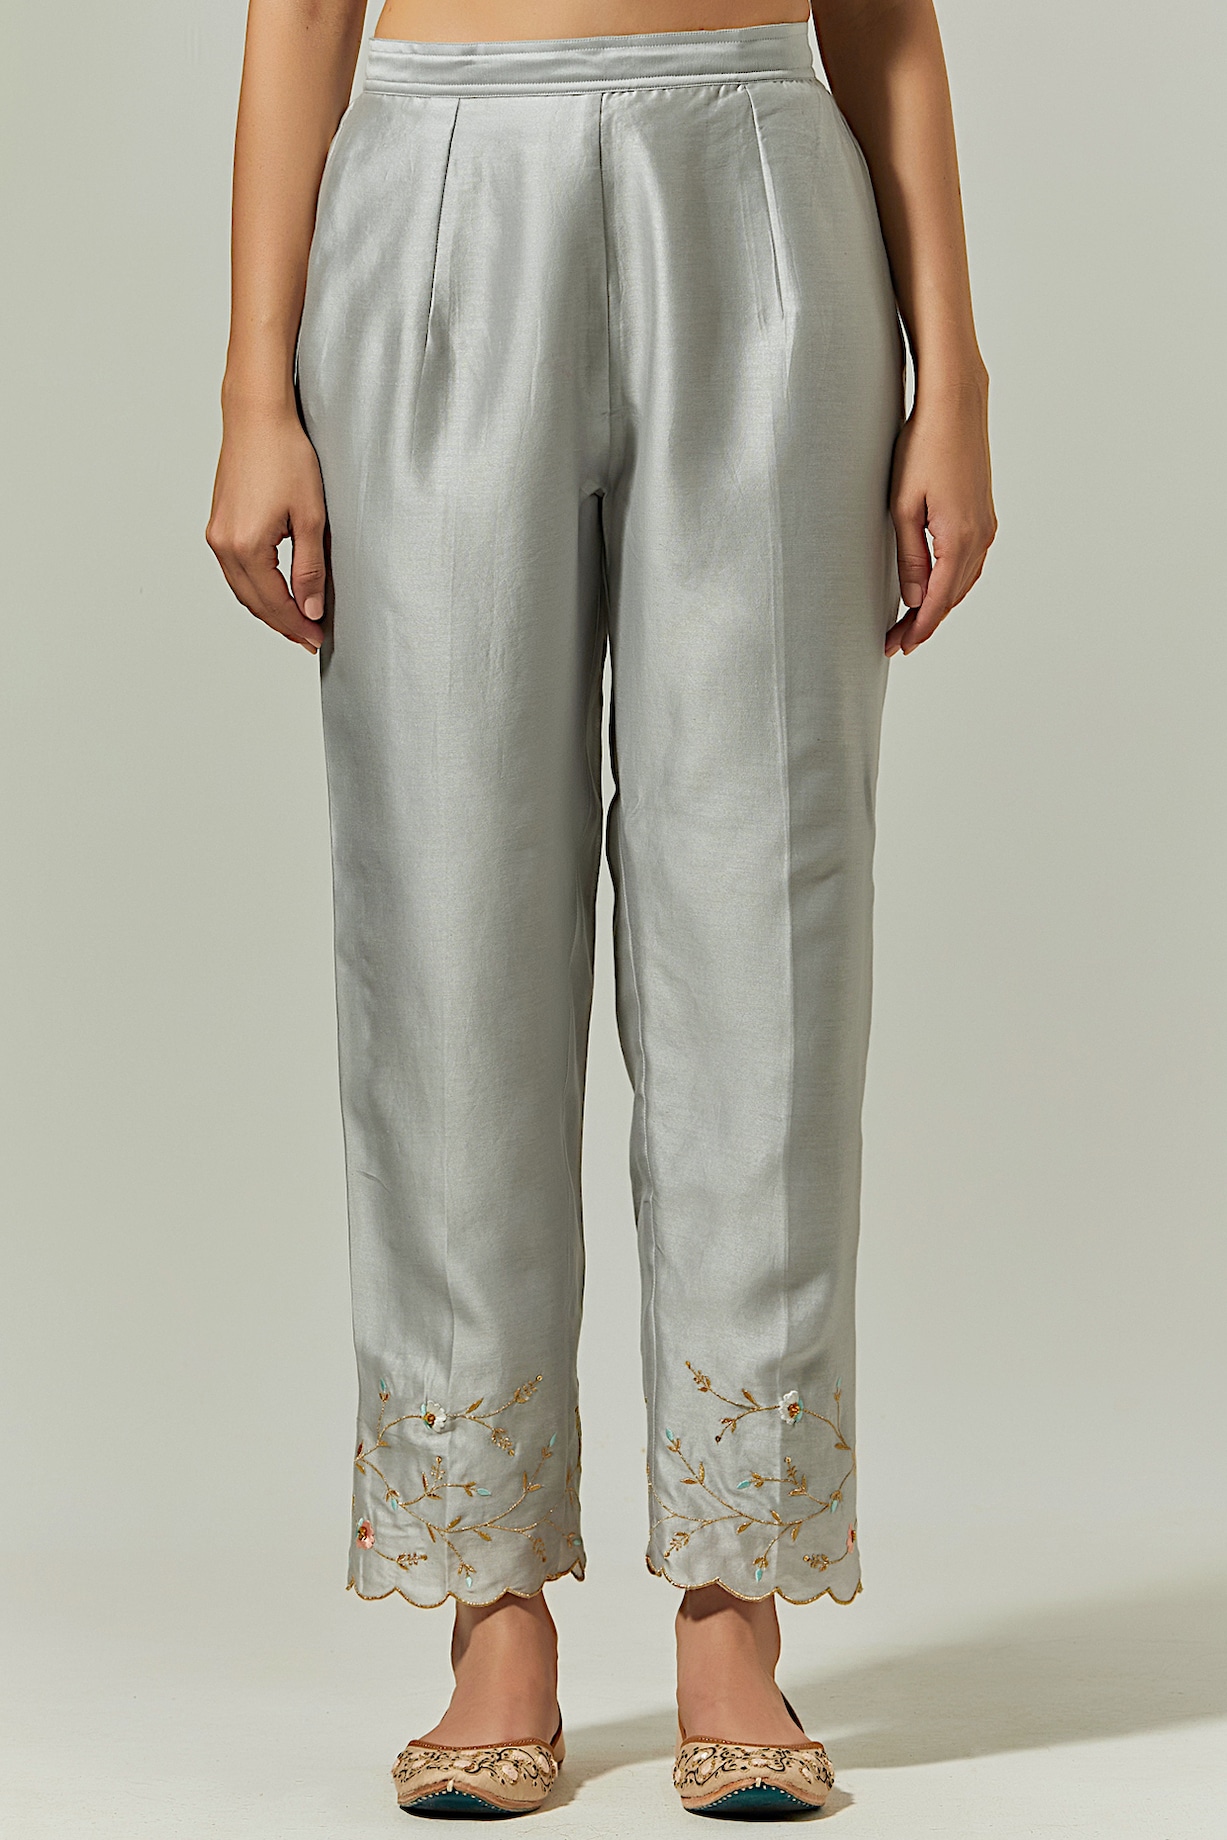 Off White Chanderi Cigarette Pants With Embroidered Borders